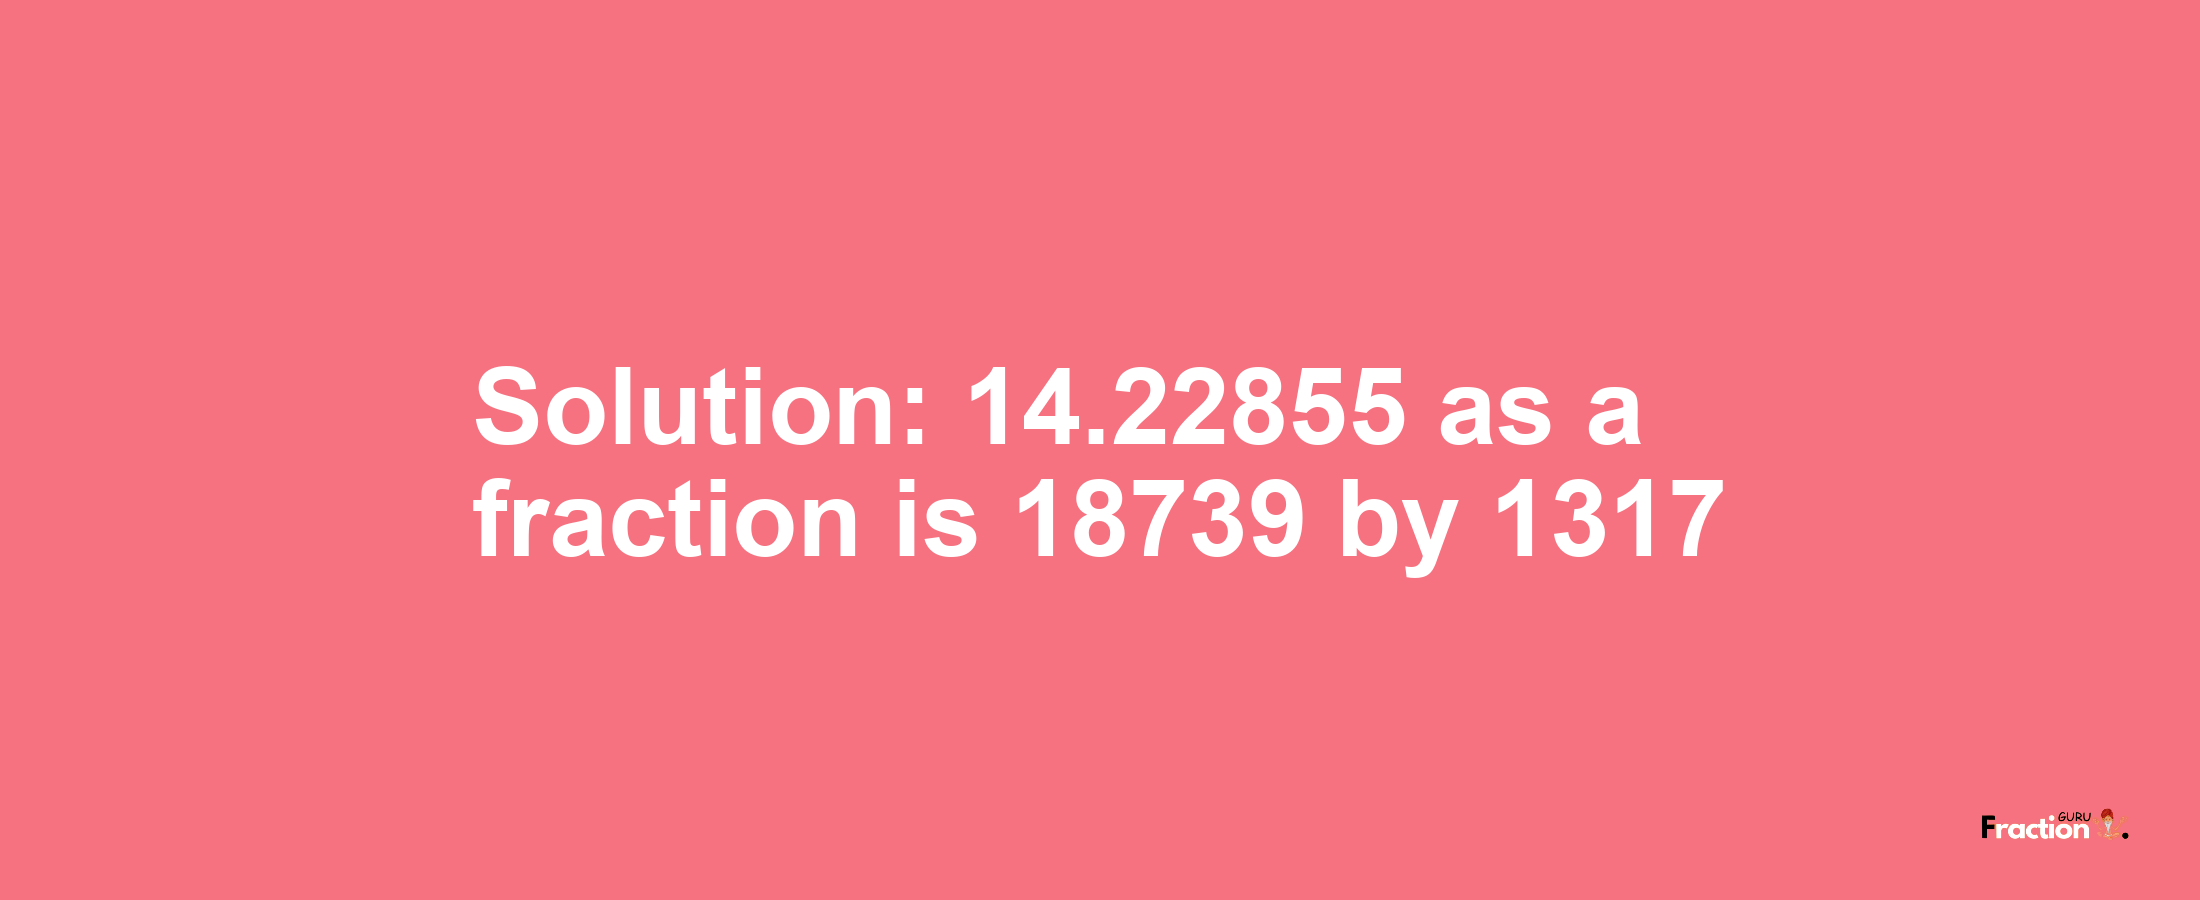 Solution:14.22855 as a fraction is 18739/1317